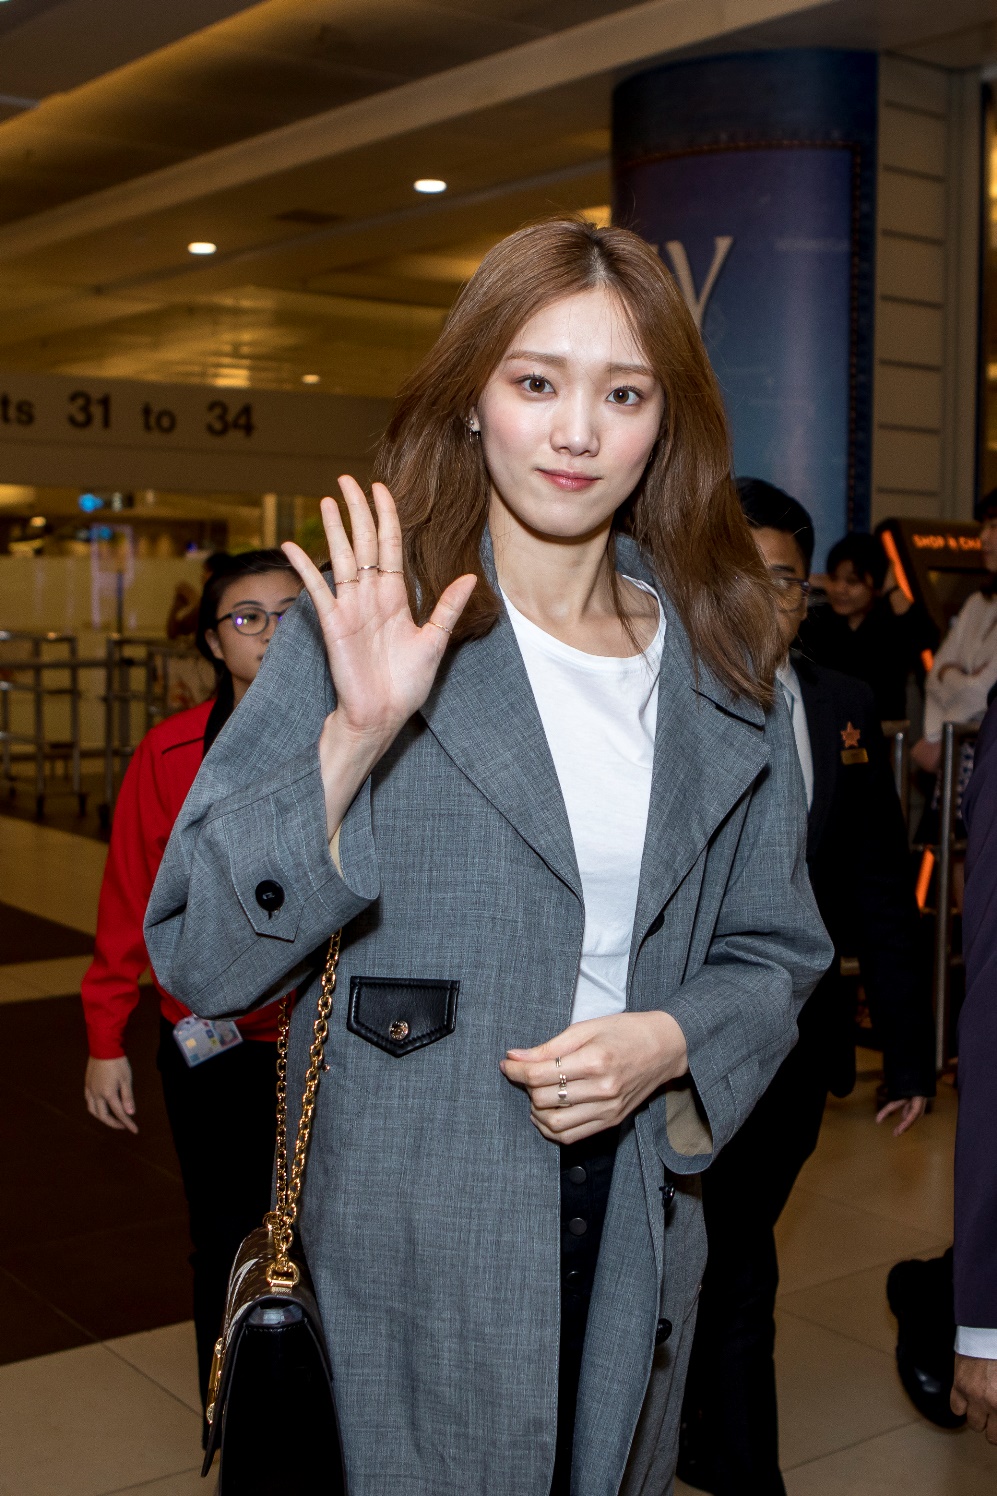 Lee Sung Kyung arrives in Singapore to attend Louis Vuitton Time Capsule  Exhibition